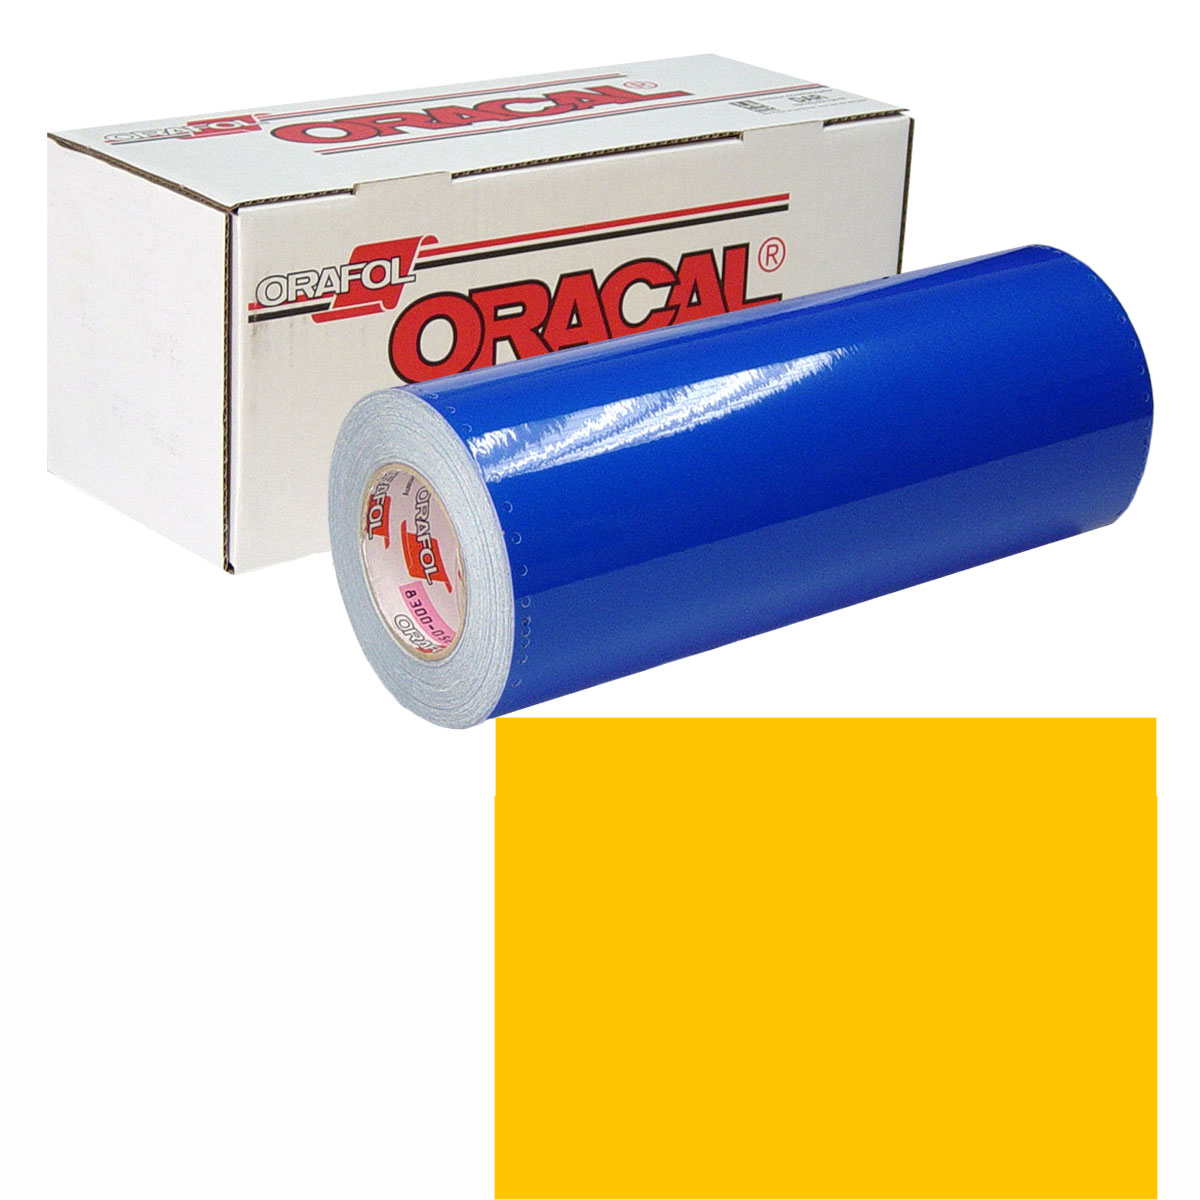 ORACAL 631 30in X 50yd 021 Yellow